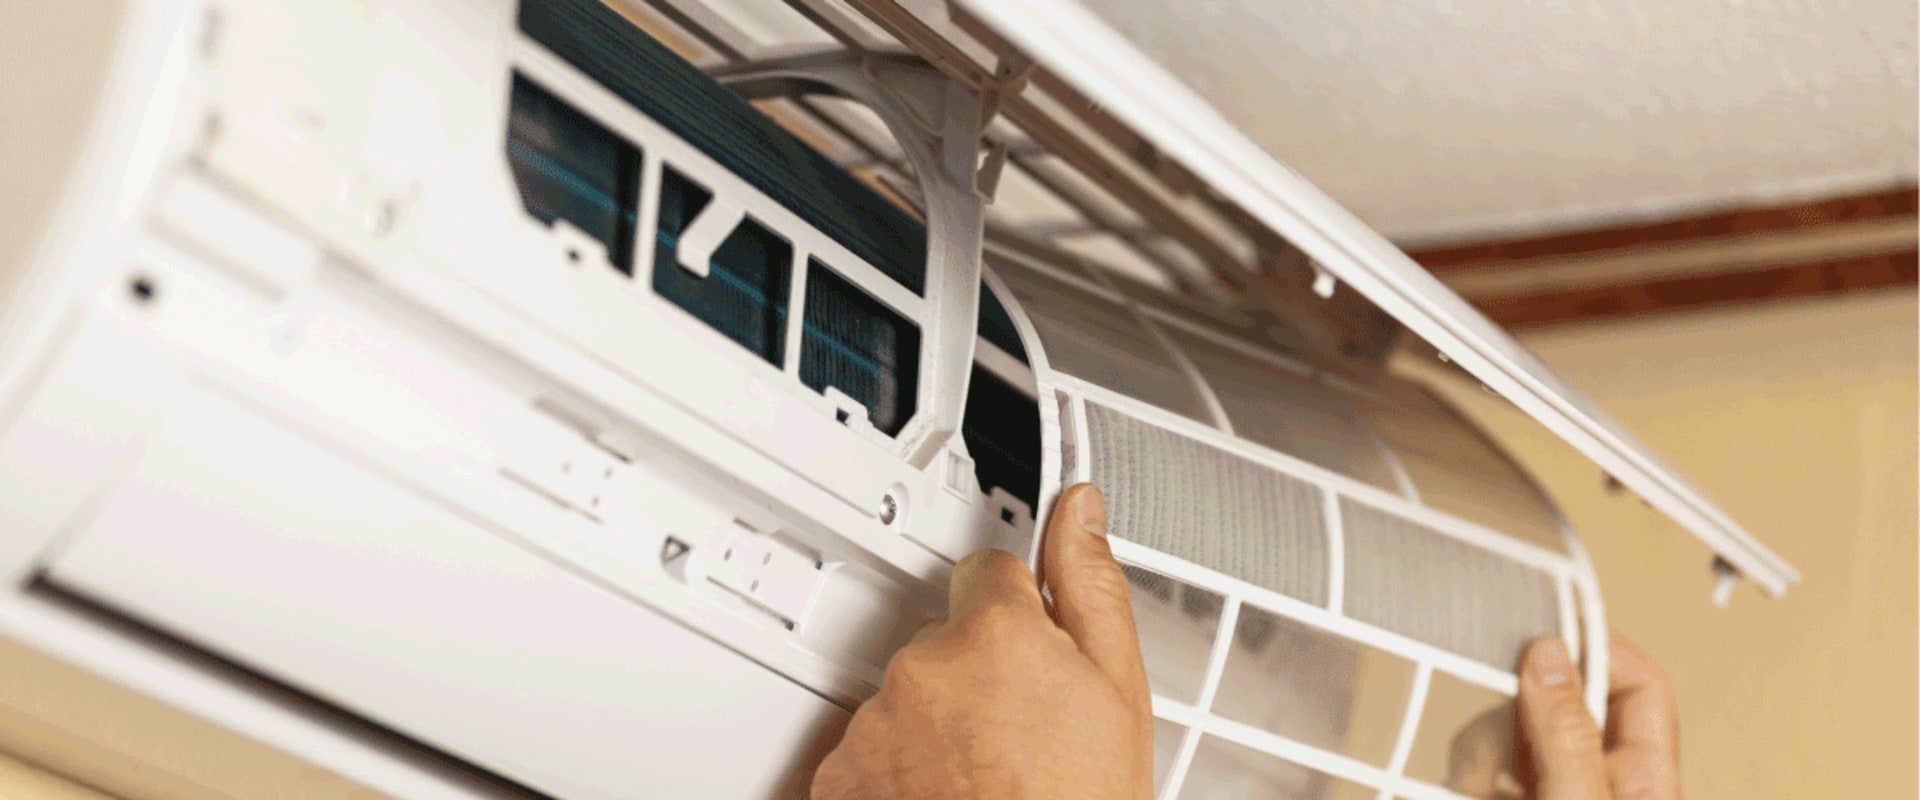 Is it Safe to Use an Air Conditioner Without a Filter?